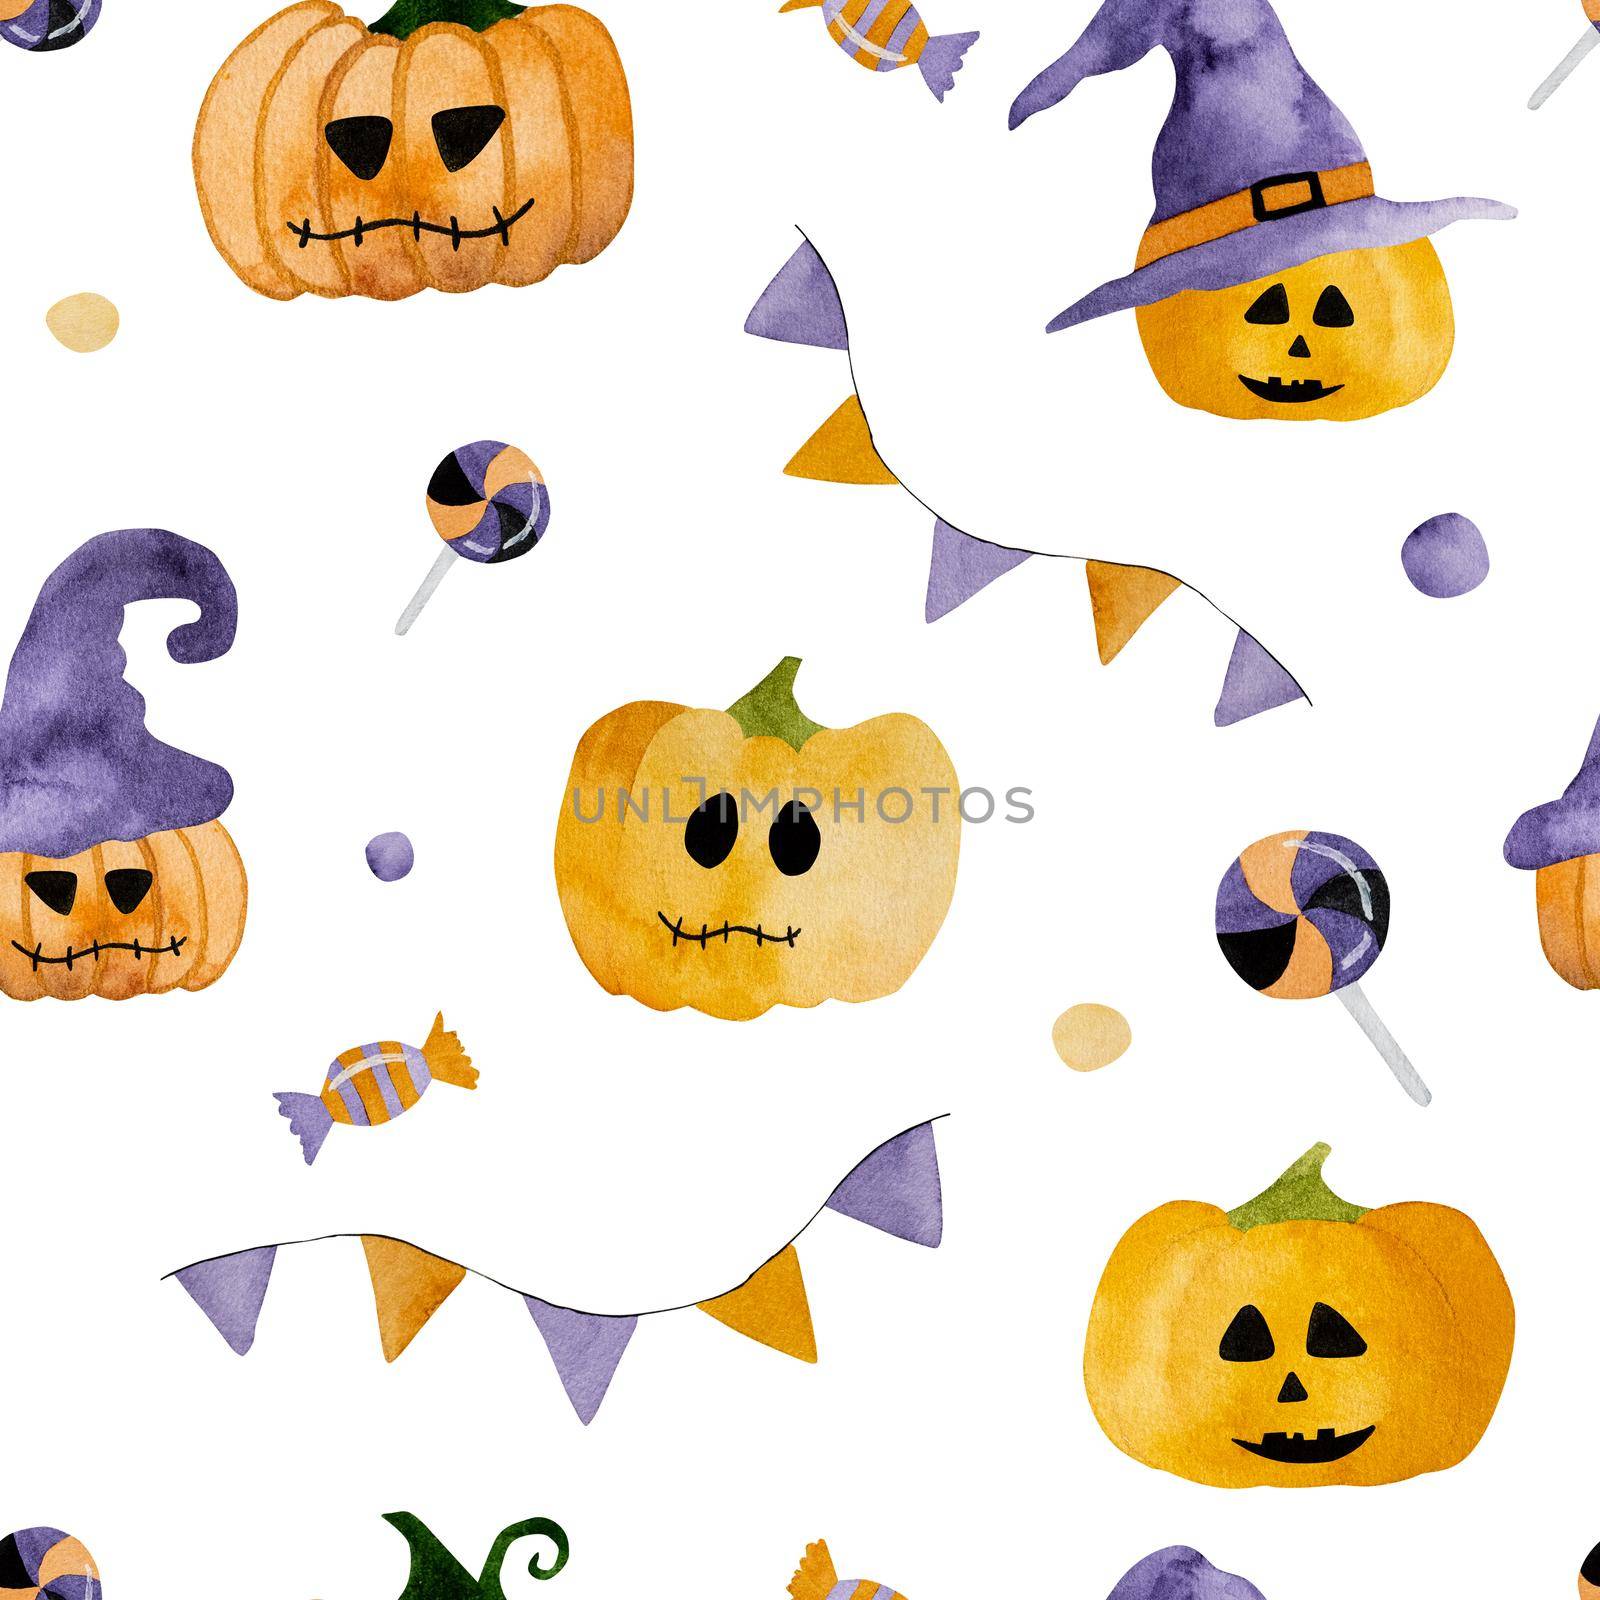 Halloween watercolor pumpkin with hats illustration for funny holiday decoration. Autumn scary vegetables illustration for postcards